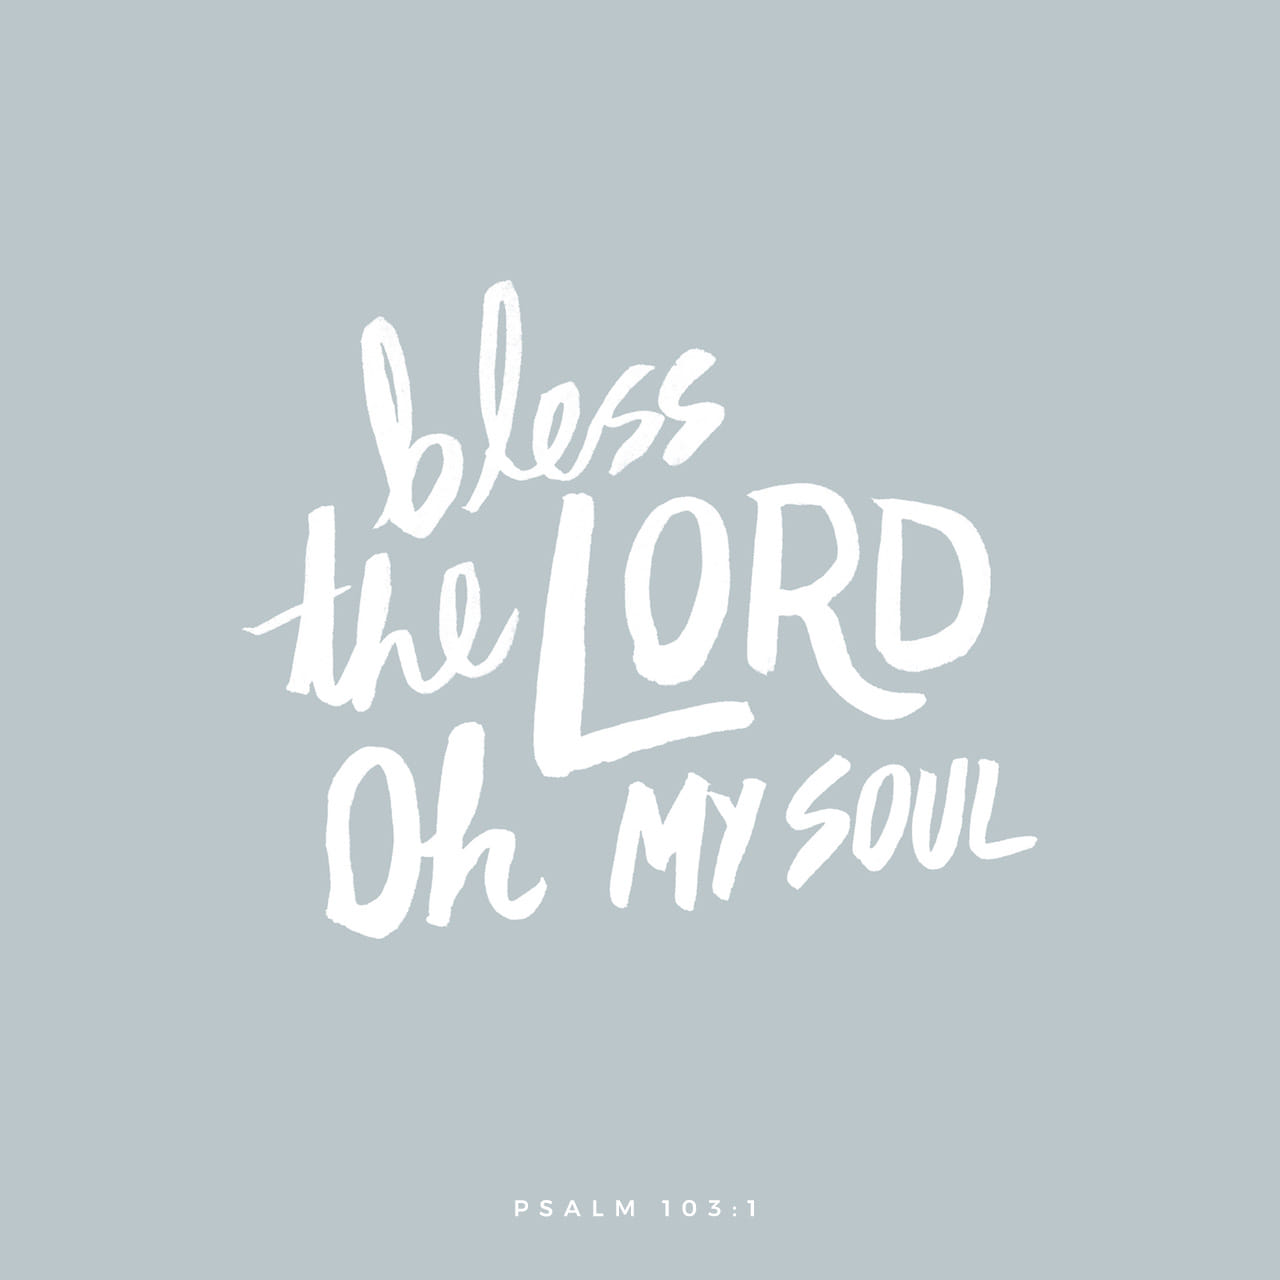 Psalm 103:1-8 Bless the LORD, O my soul, and all that is within me, bless  his holy name! Bless the LORD, O my soul, and forget not all his benefits,  who forgives